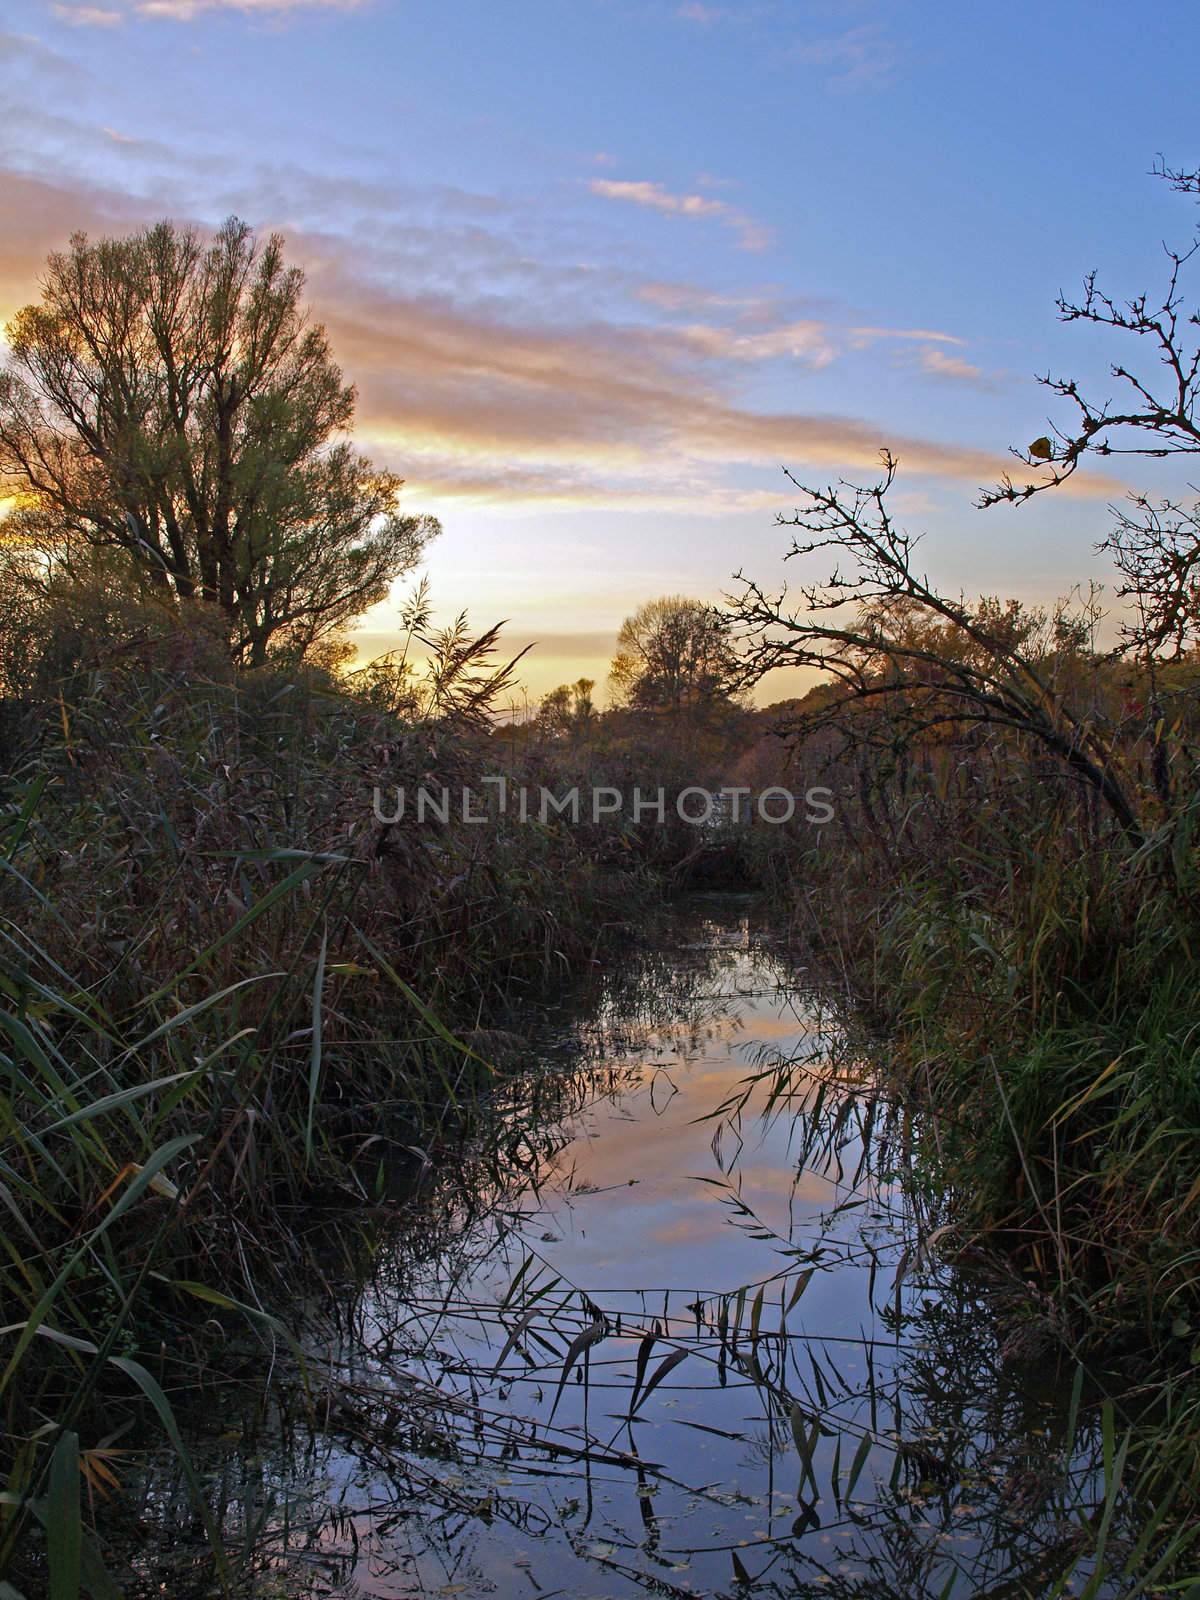 Photo taken on an autumn day at sunset close to the bridge over Great Raveley Drain, at the entrance to Woodwalton fen.